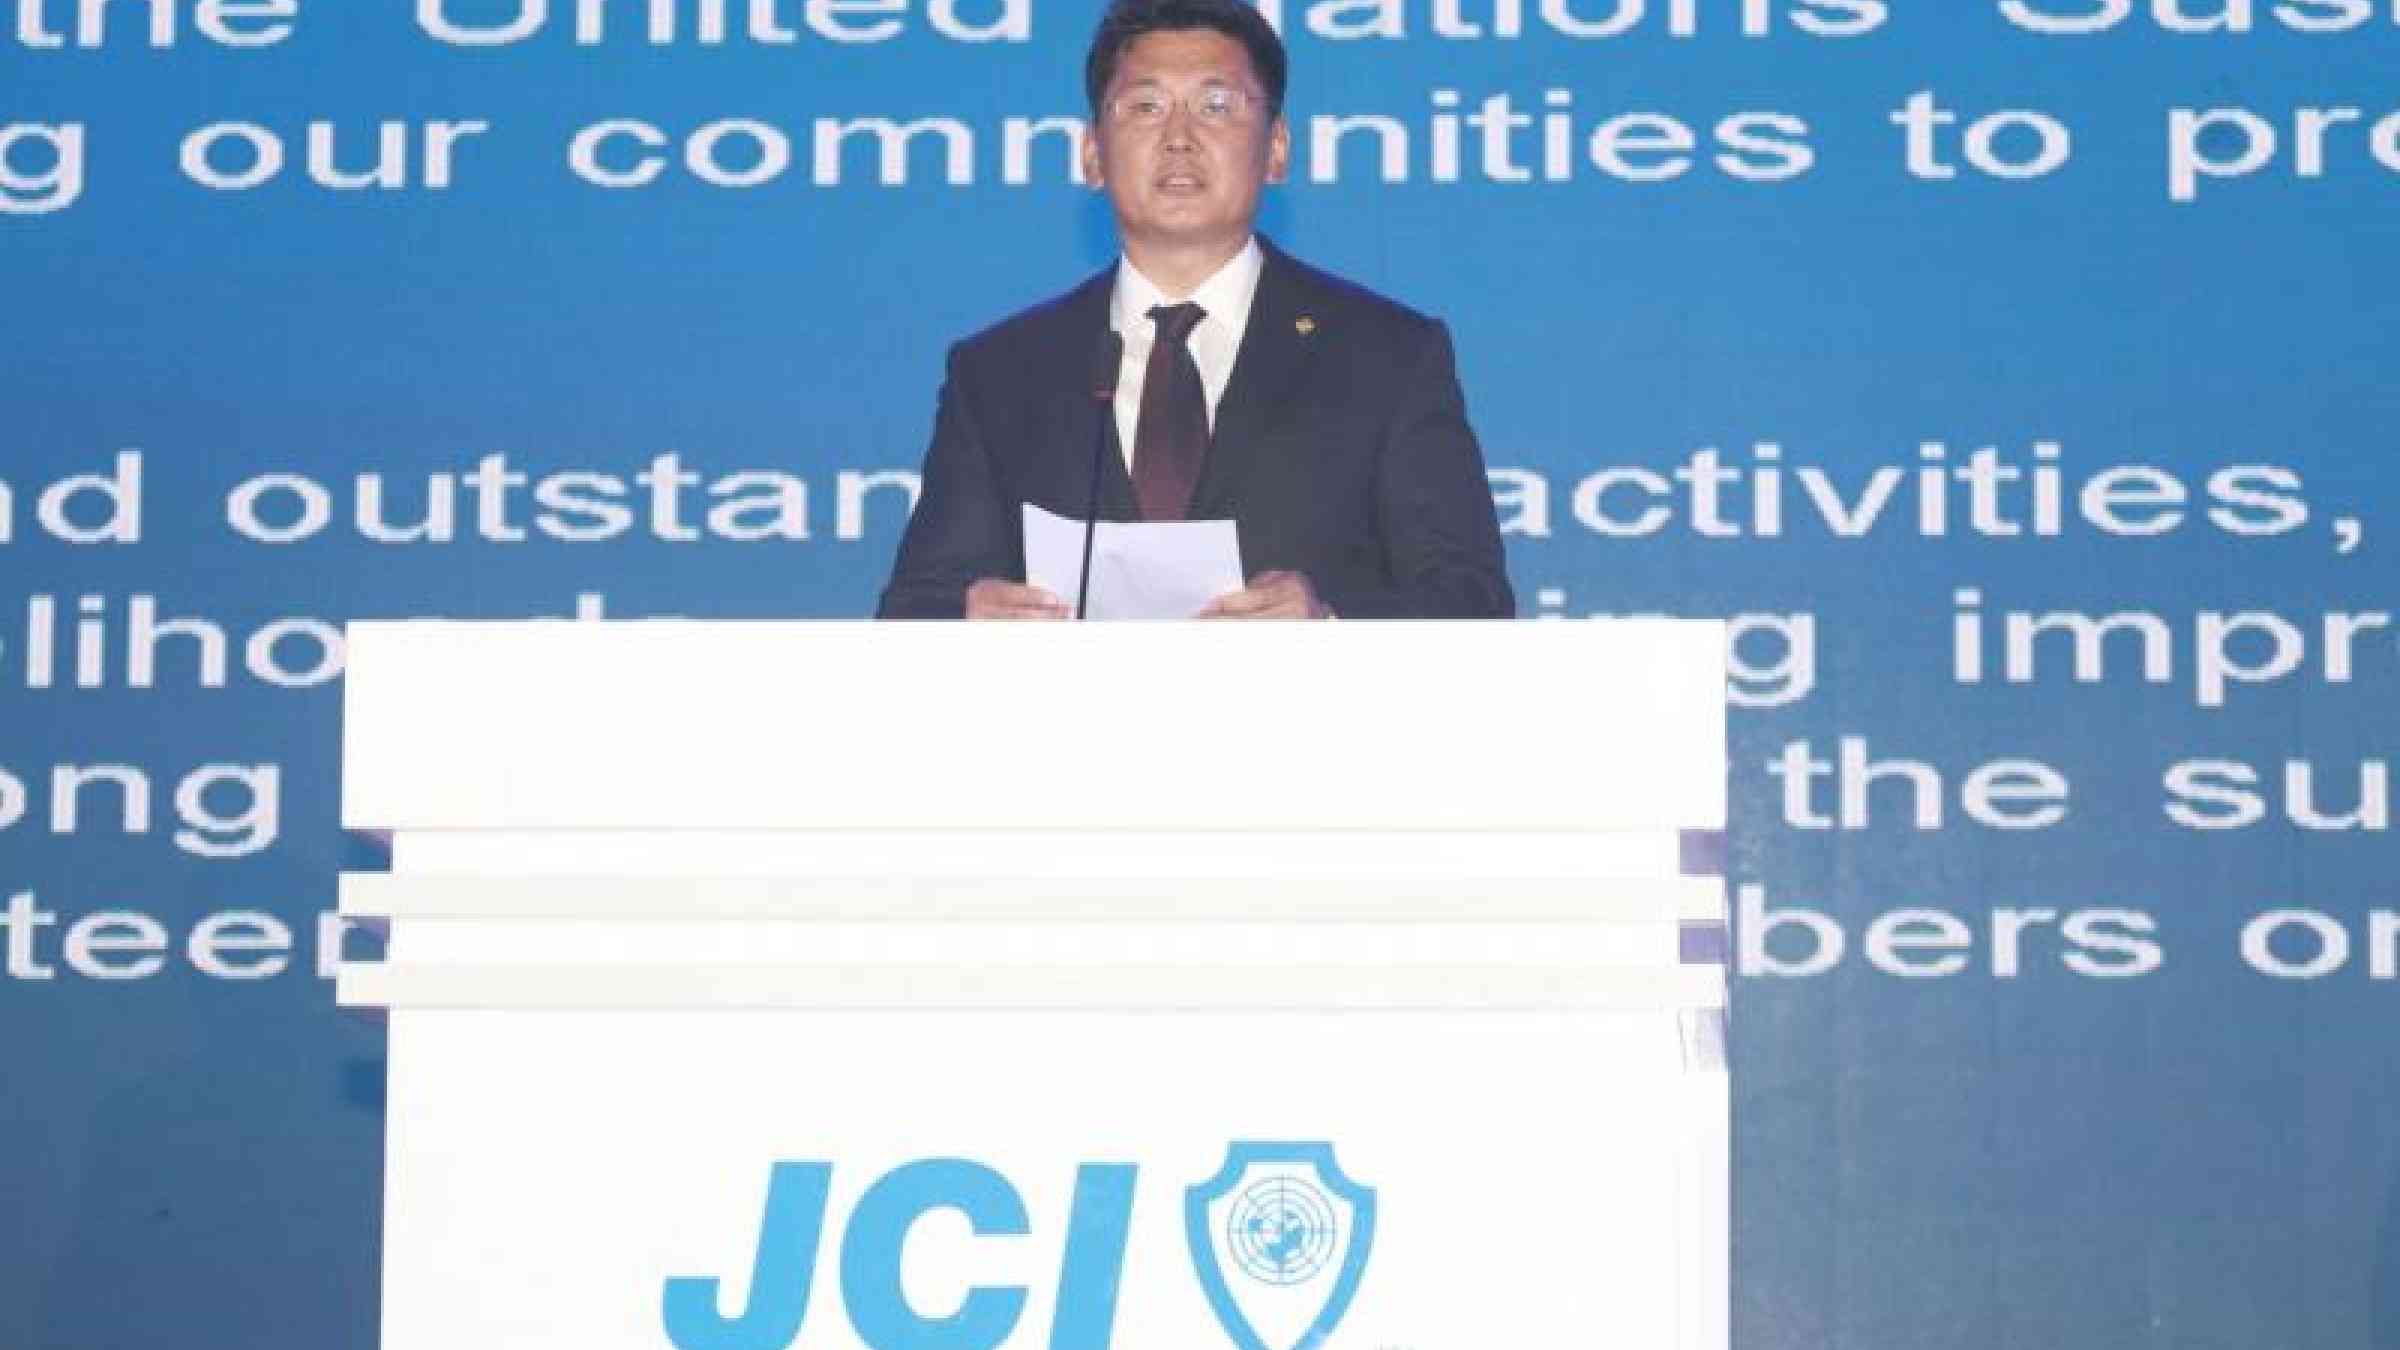 The Deputy Prime Minister of Mongolia, H.E. Khurelsukh addresses 4,000 youth leaders from 51 countries on the importance of DRR. (Photo: Government of Mongolia)